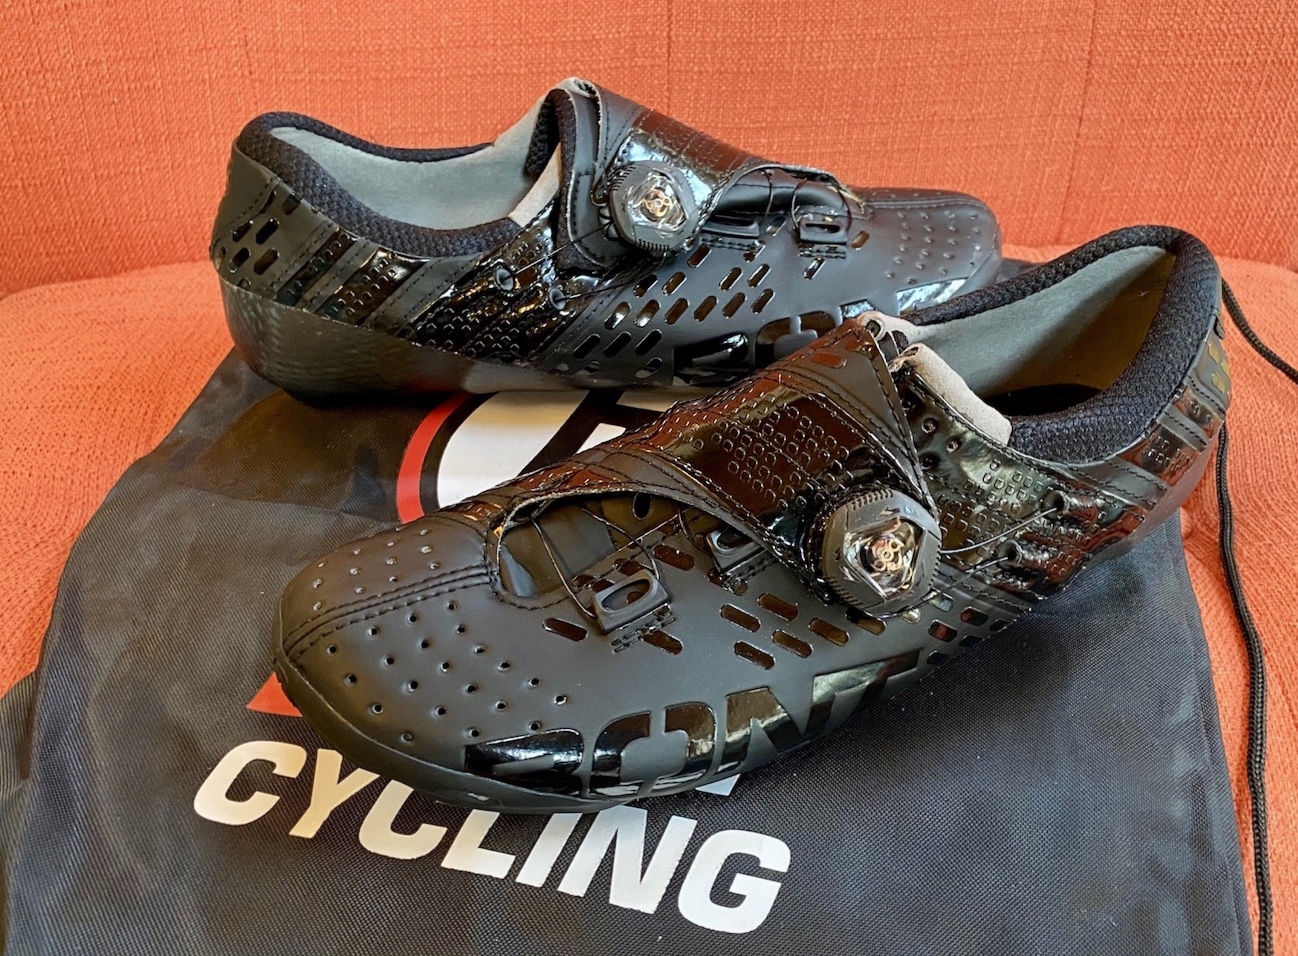 CapoVelo.com | First Look at Bont's Helix Road Shoe